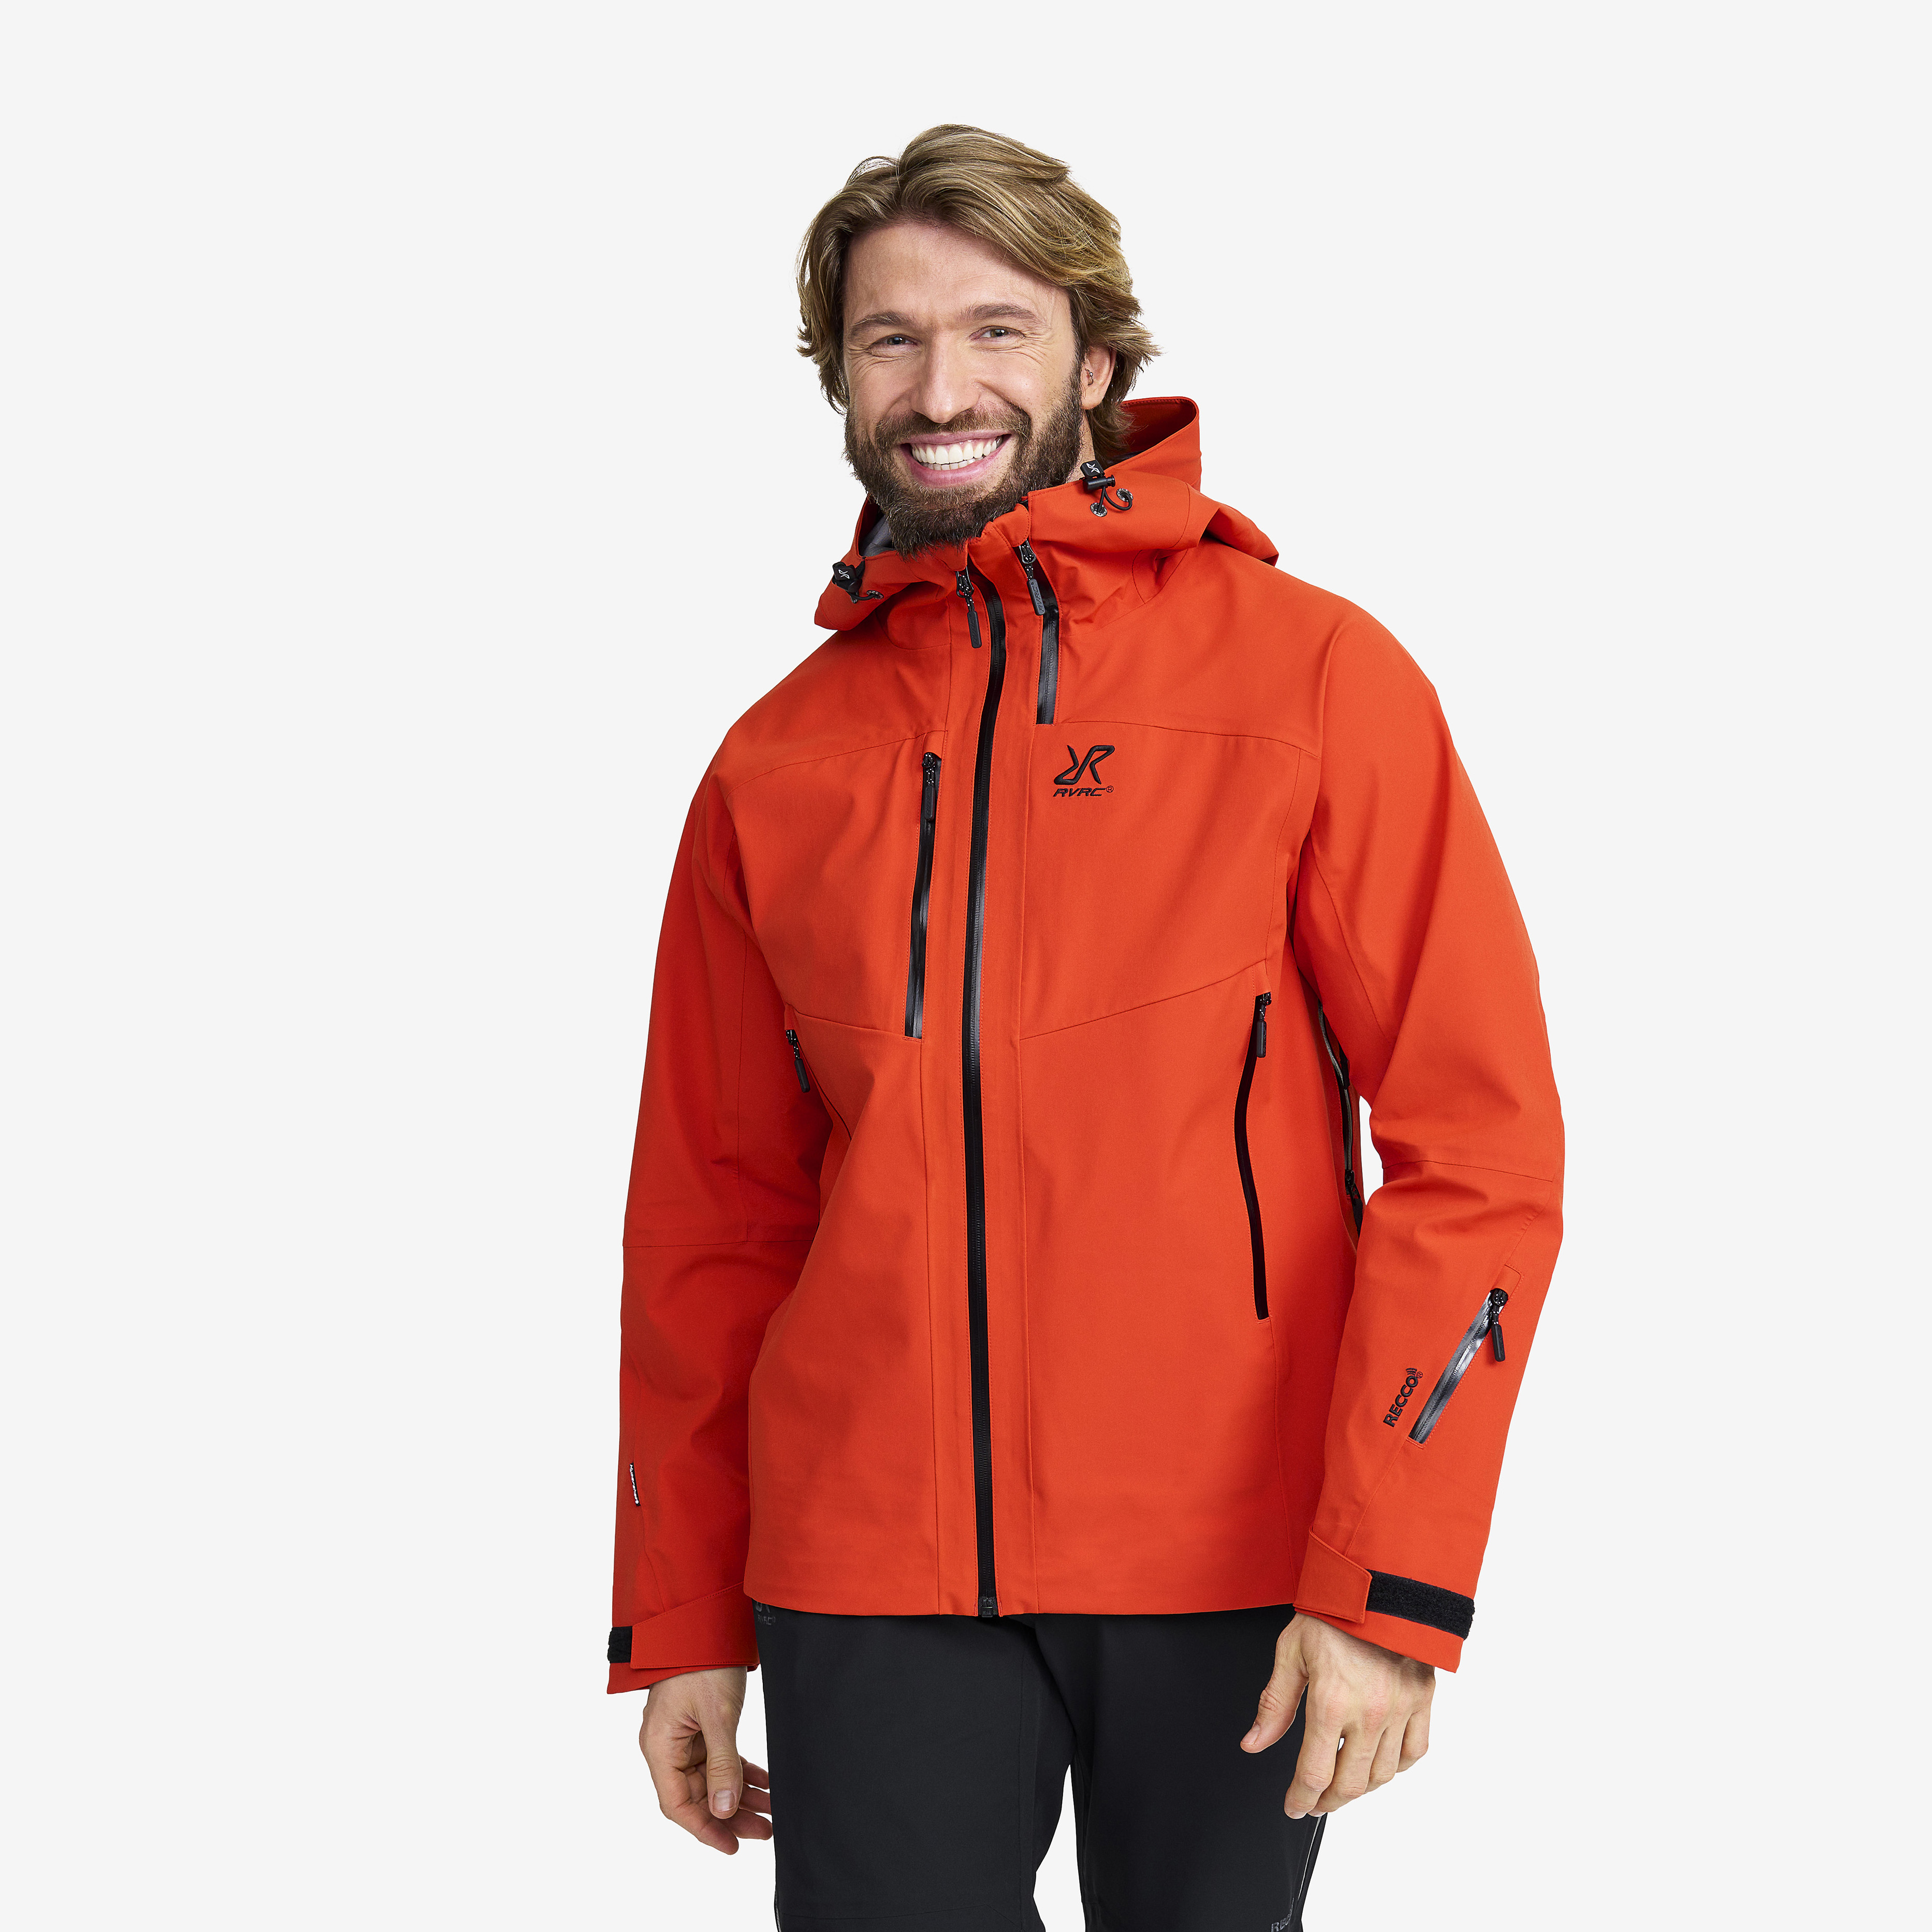 Cyclone 3L Shell Jacket Pureed Pumpkin Homme